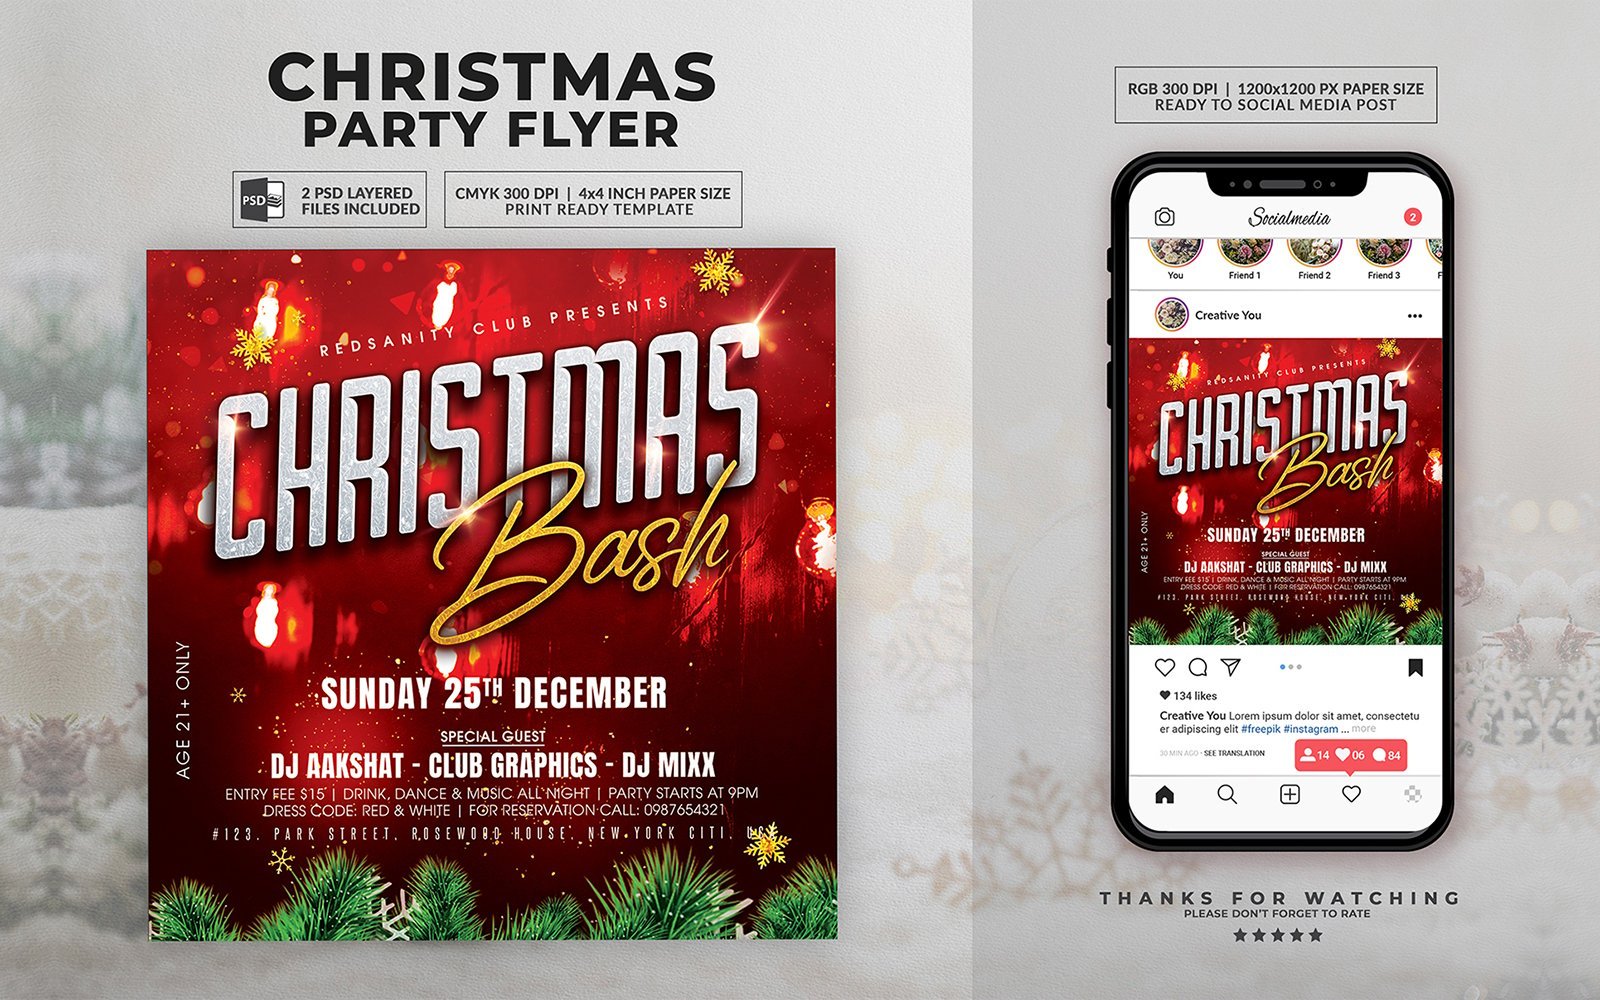 Template #366234 Christmas Bash Webdesign Template - Logo template Preview